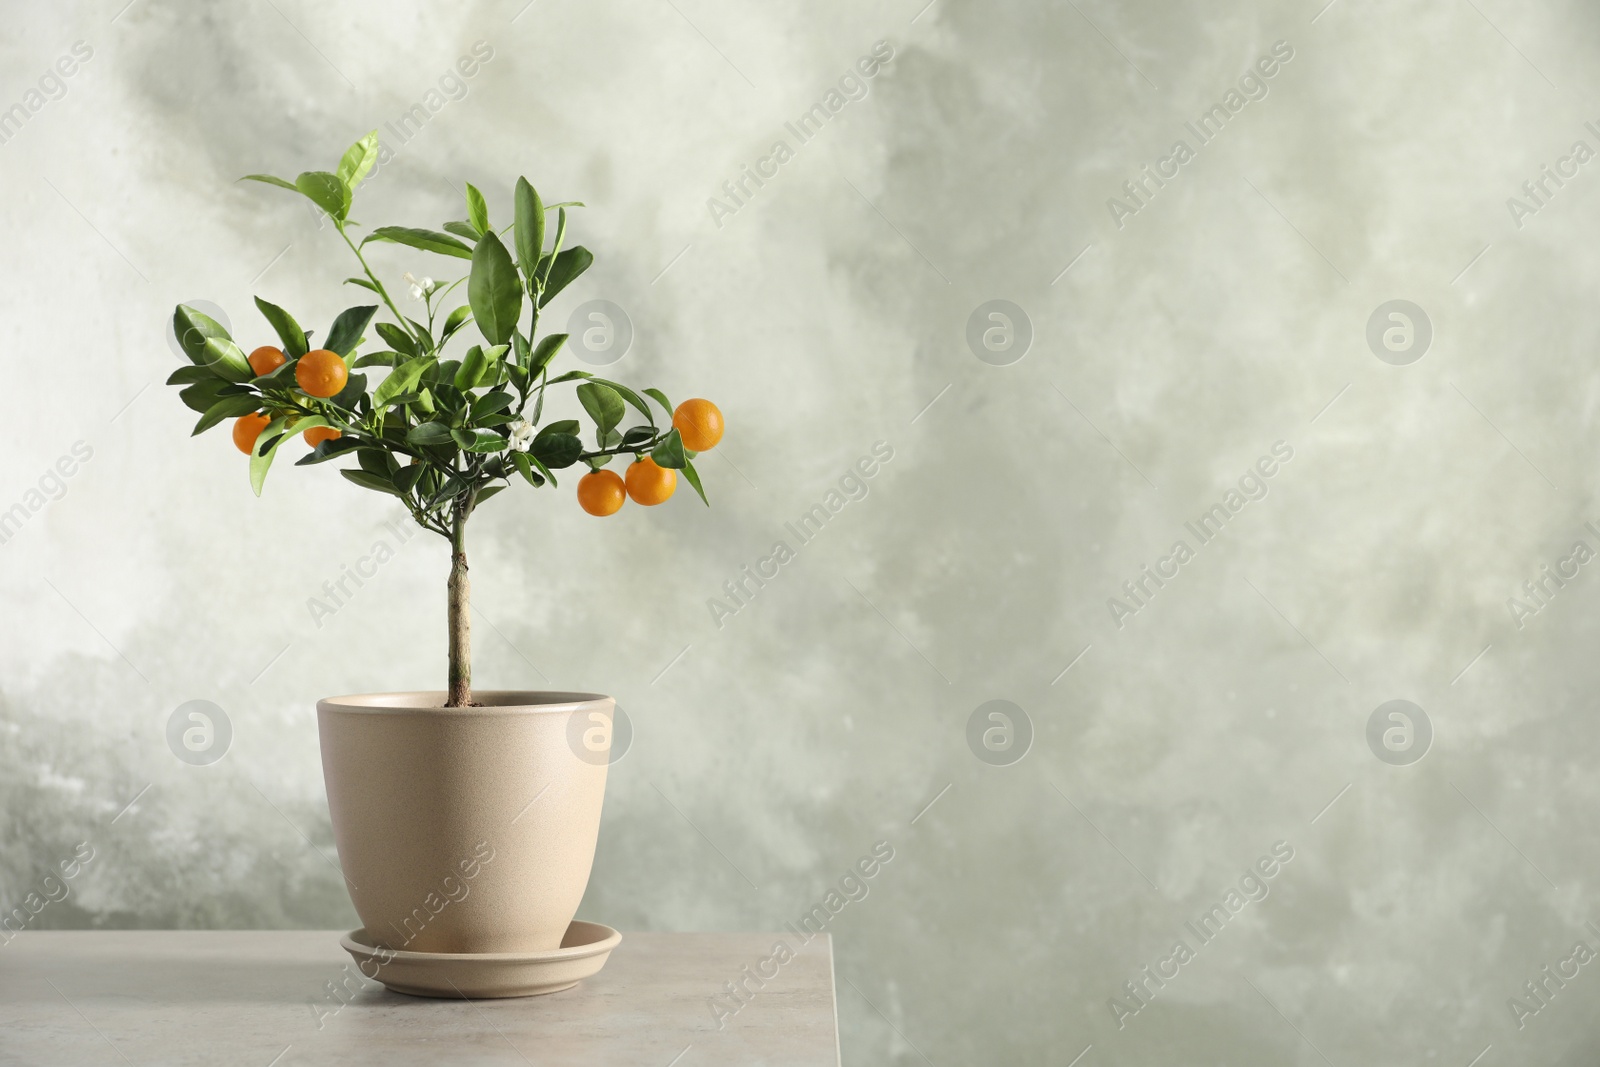 Photo of Citrus tree in pot on table against grey background. Space for text